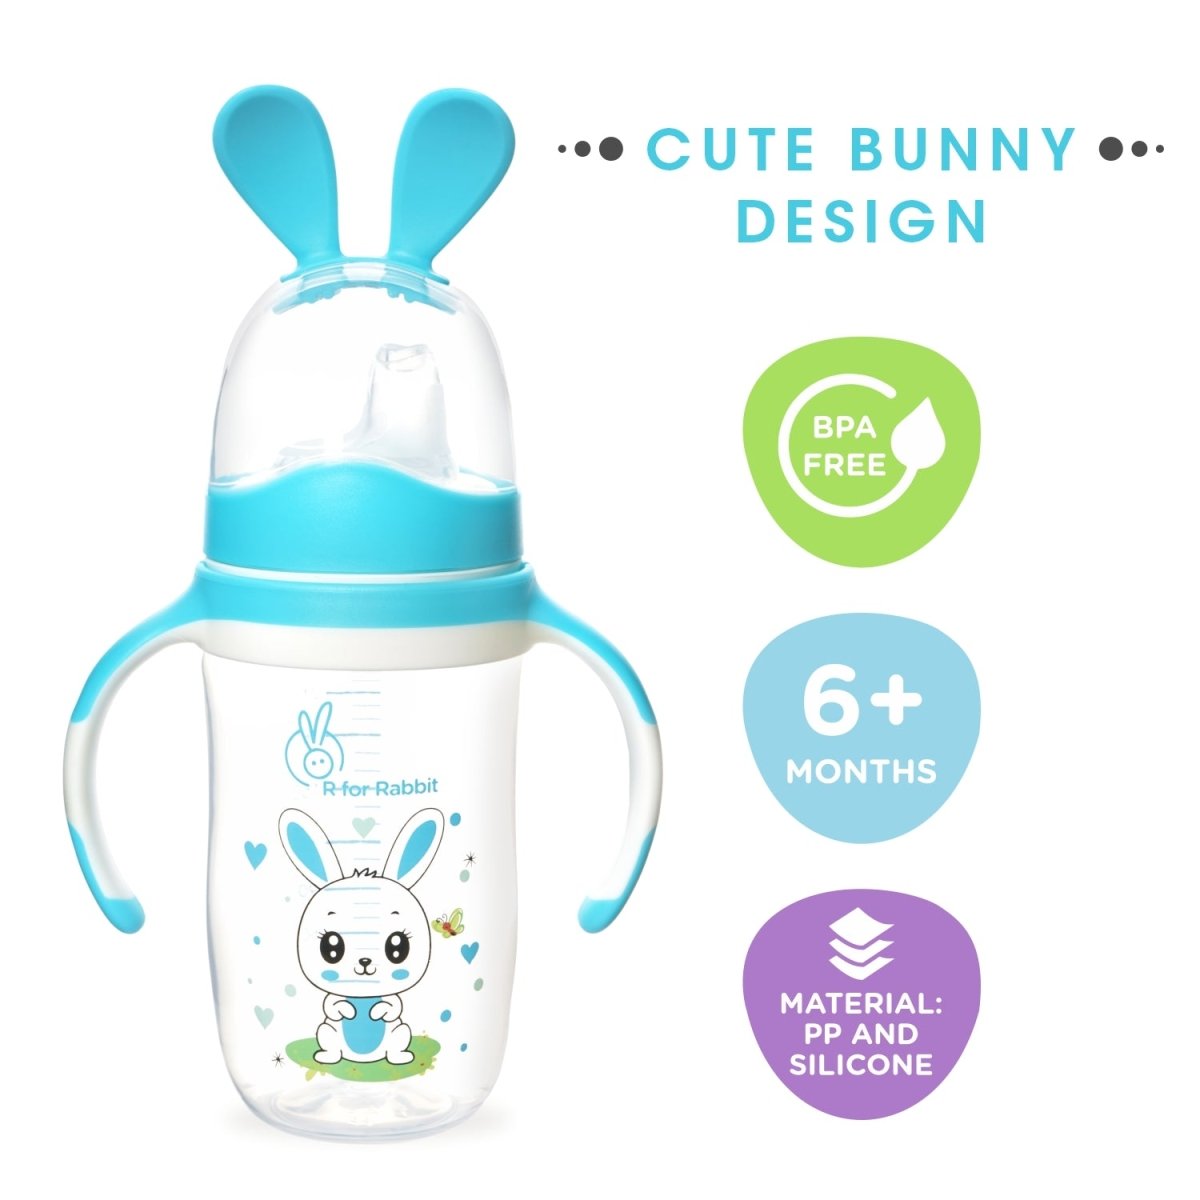 R for Rabbit Bunny Baby Spout Sippy Cup- Blue - SSBNB01